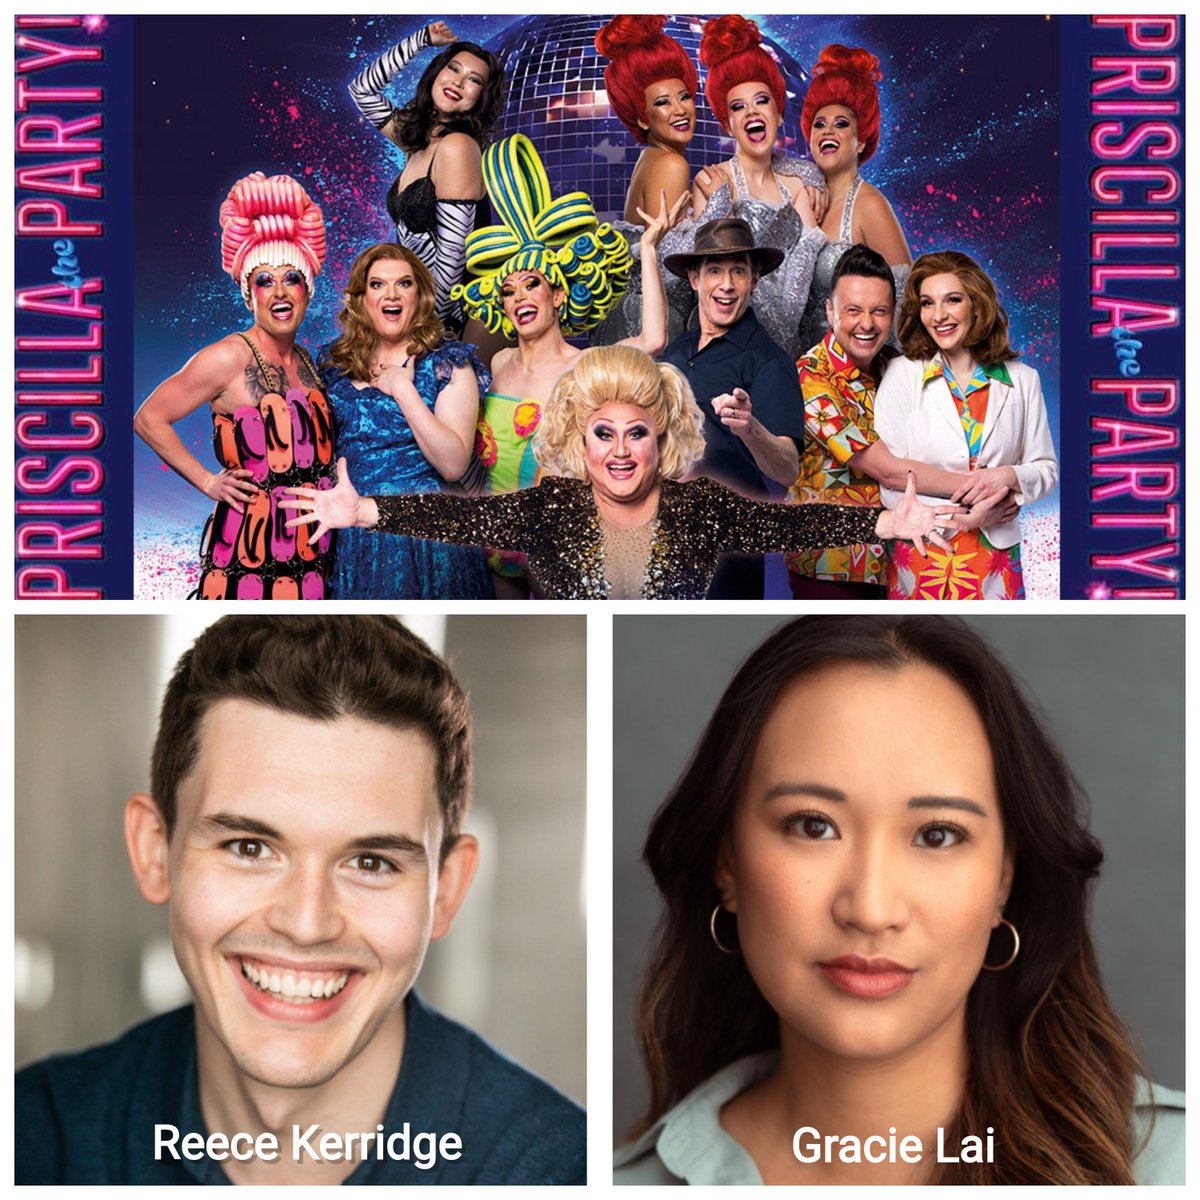 Best wishes to Reece Kerridge @thegracielou1 and @graciemlai for the official opening night of @priscillaparty this evening. We look forward to seeing you later! Casting By: @dobcasting priscillatheparty.com